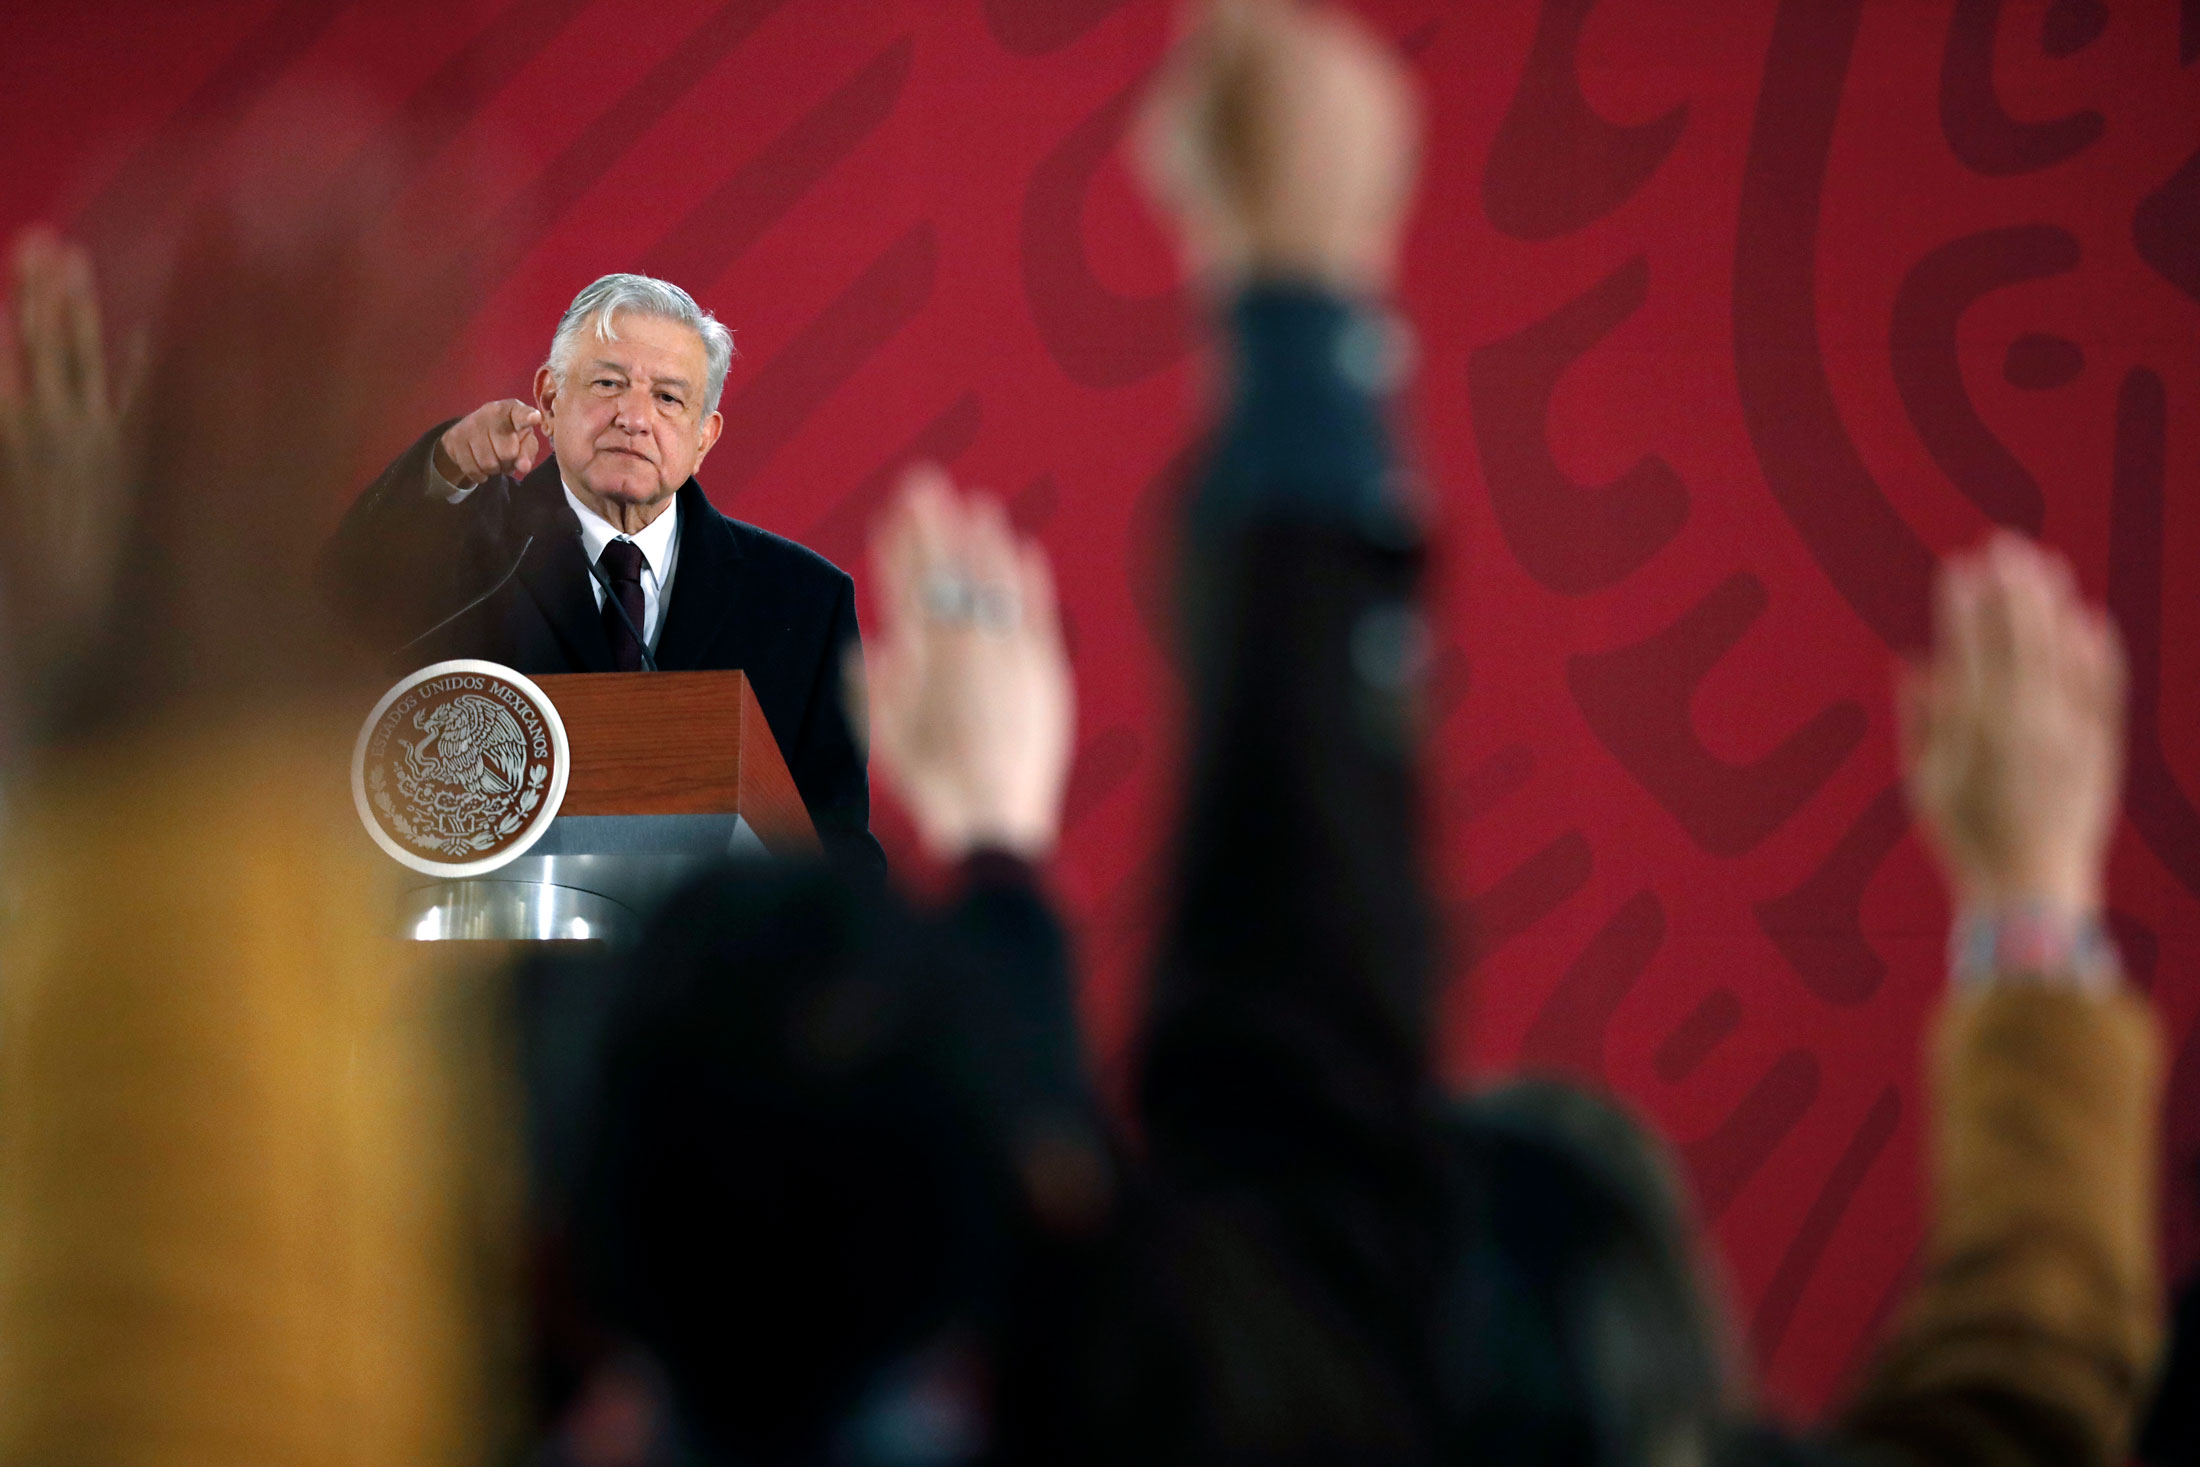 Lopez Obrador takes a question during a daily news conference in Mexico City.